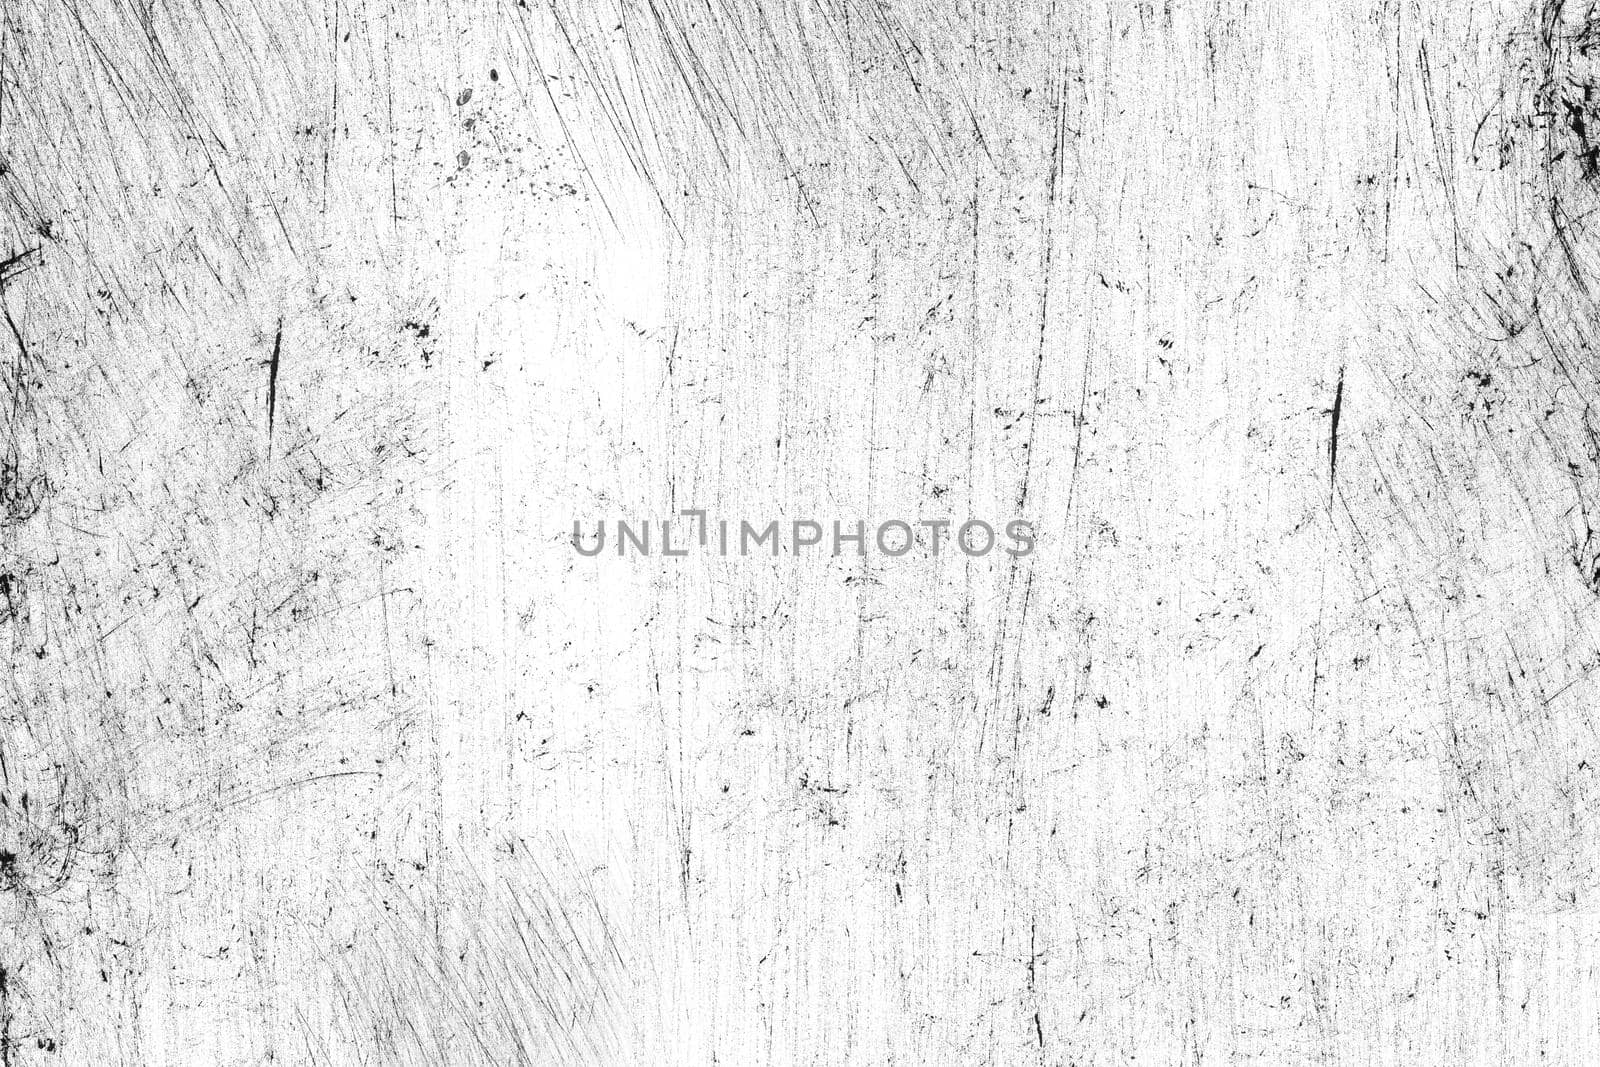 Background, texture of scratches and strokes in black and white colors